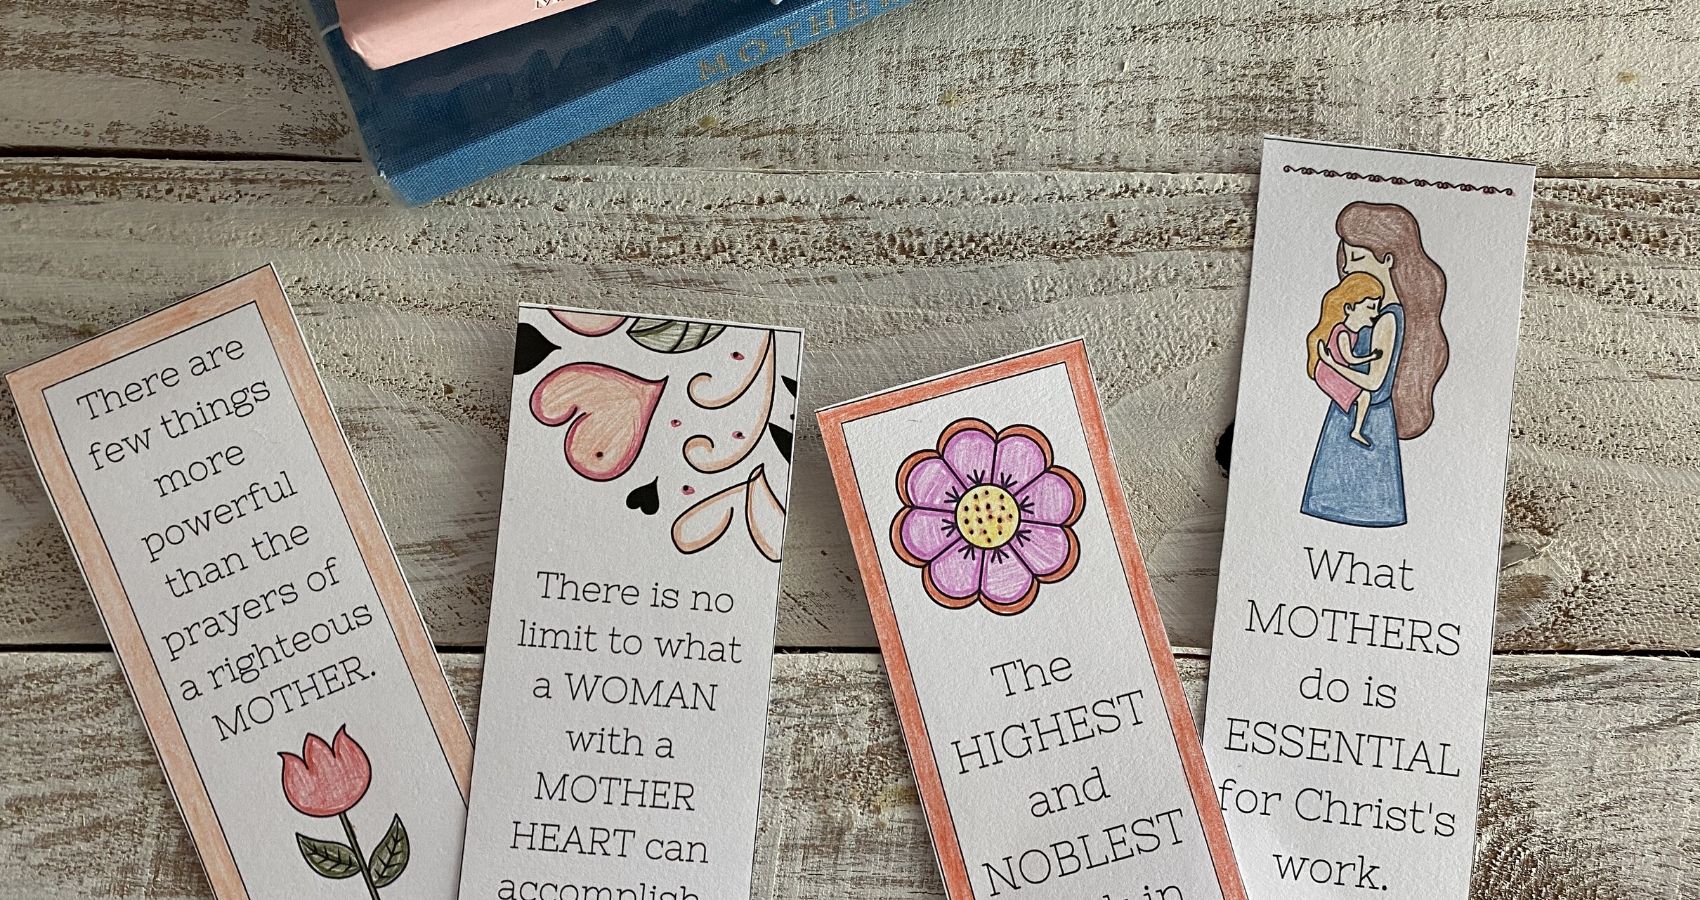 mother-s-day-bookmark-printable-ready-to-color-or-so-she-says